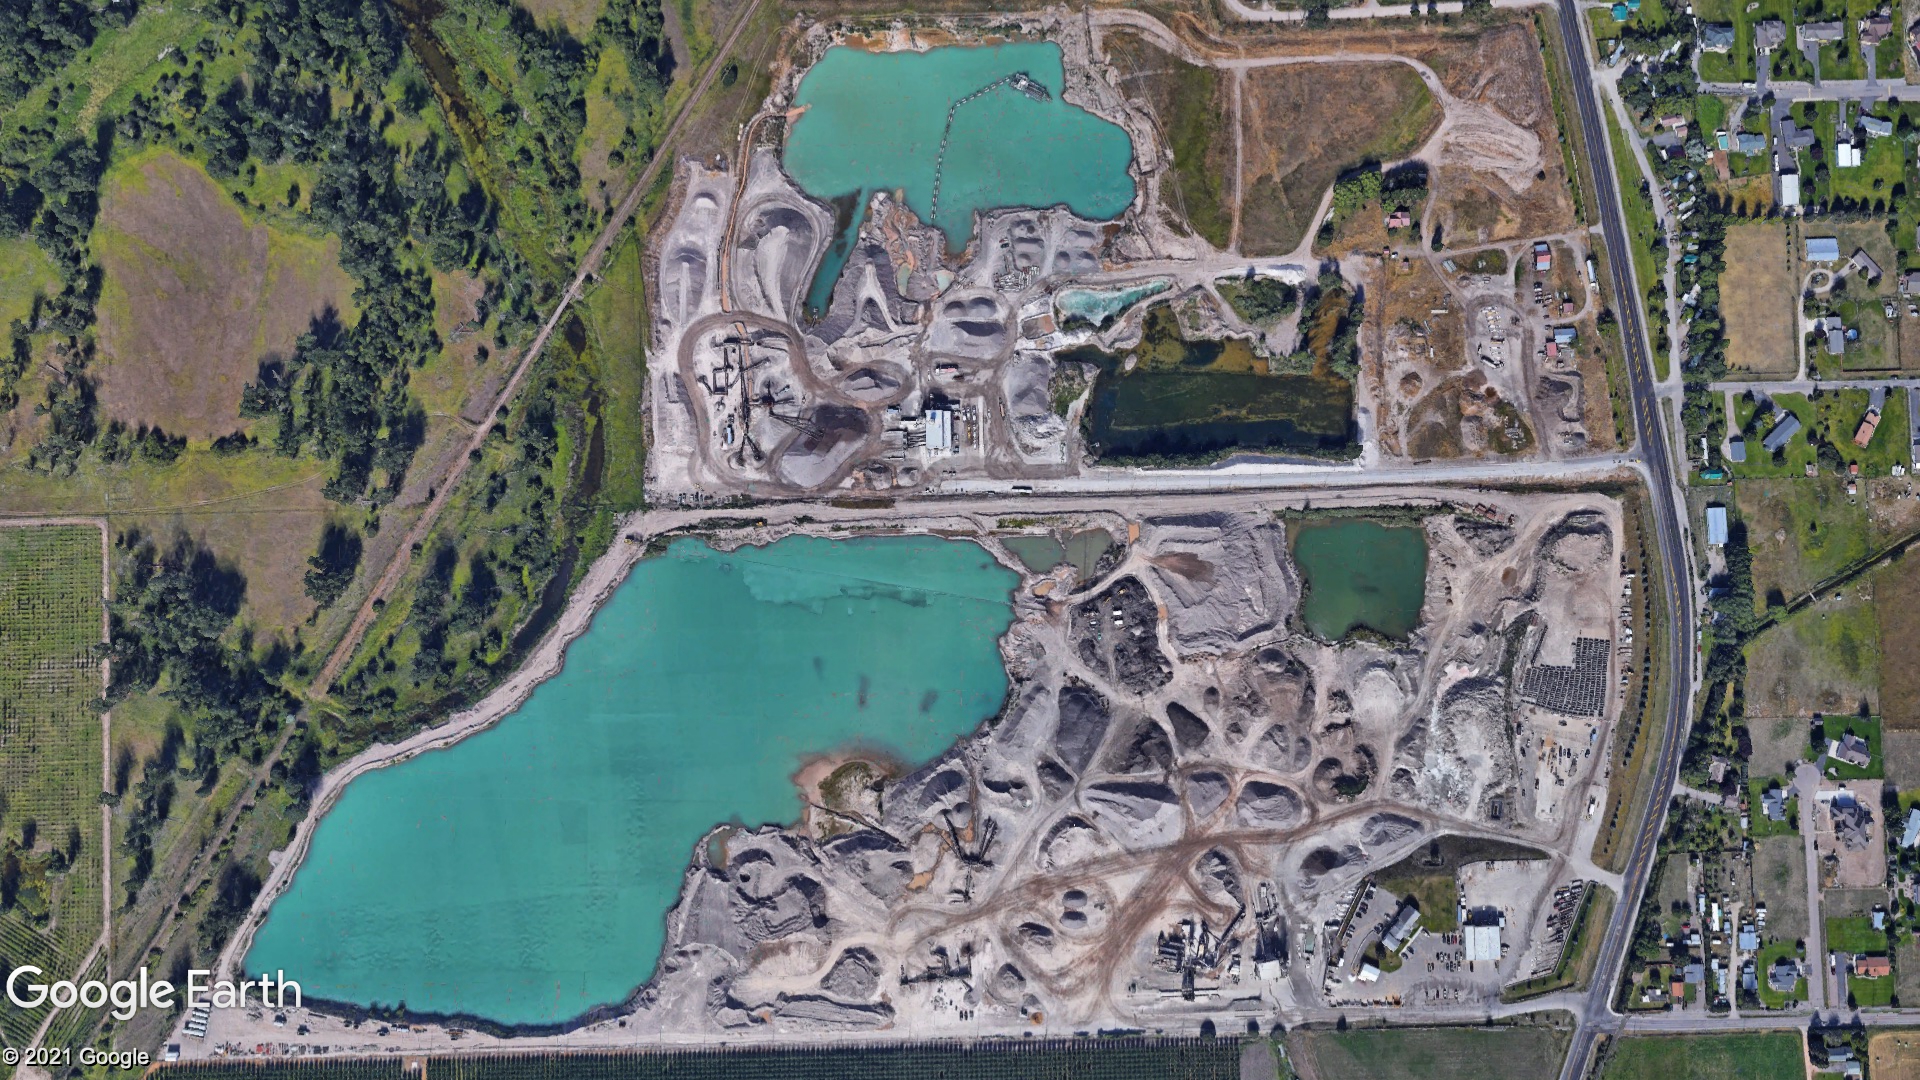 A satellite image showing an aggregate production site with large ponds and rock piles.